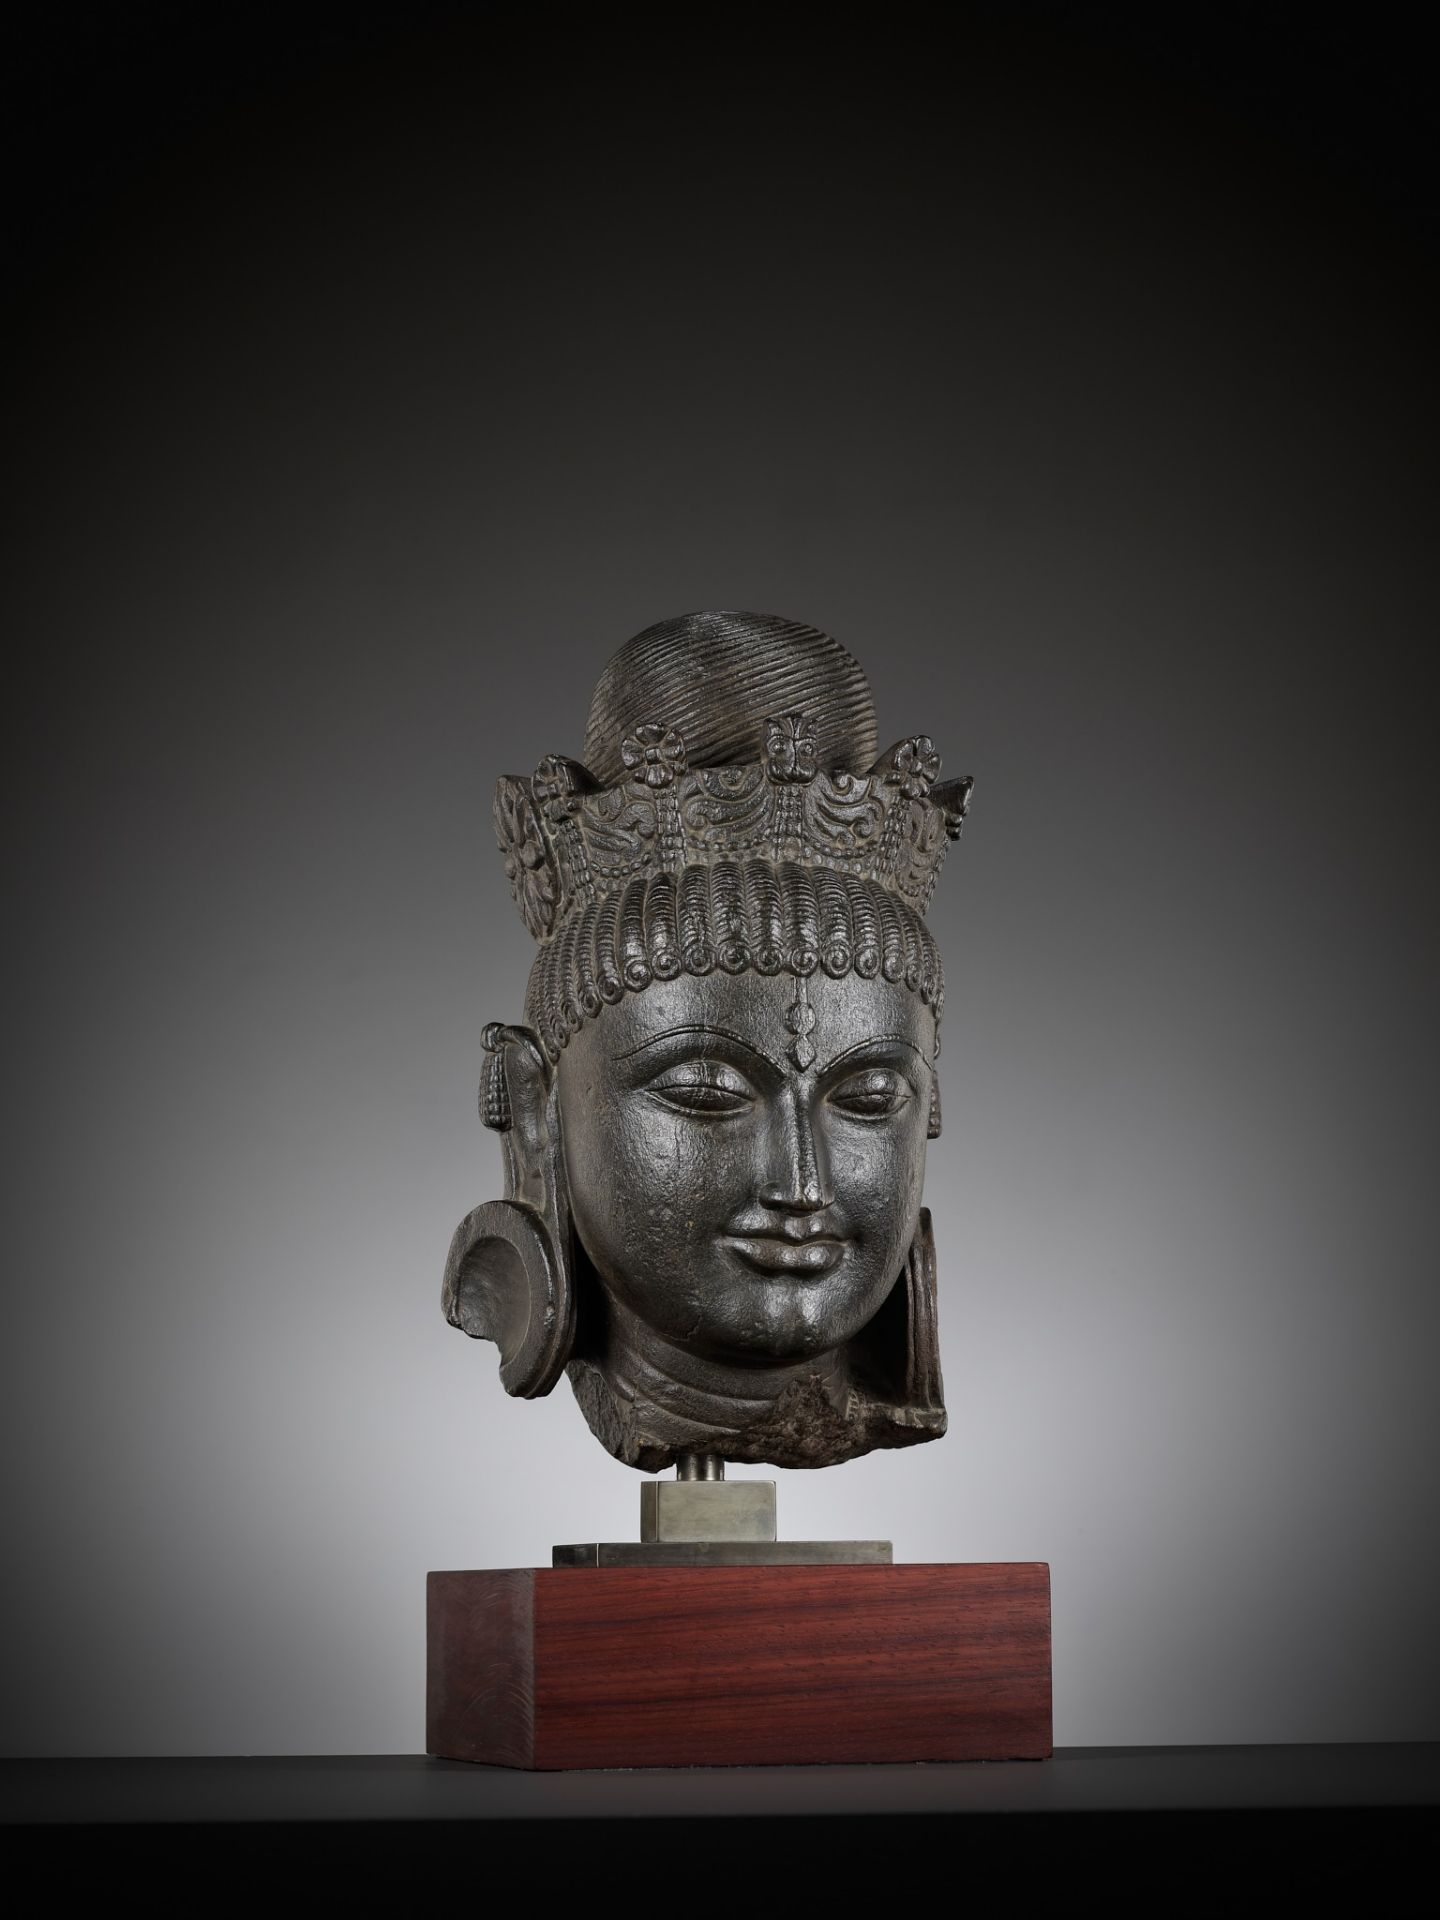 AN IMPORTANT AND MONUMENTAL BLACK STONE HEAD OF TARA, PALA PERIOD - Image 3 of 15